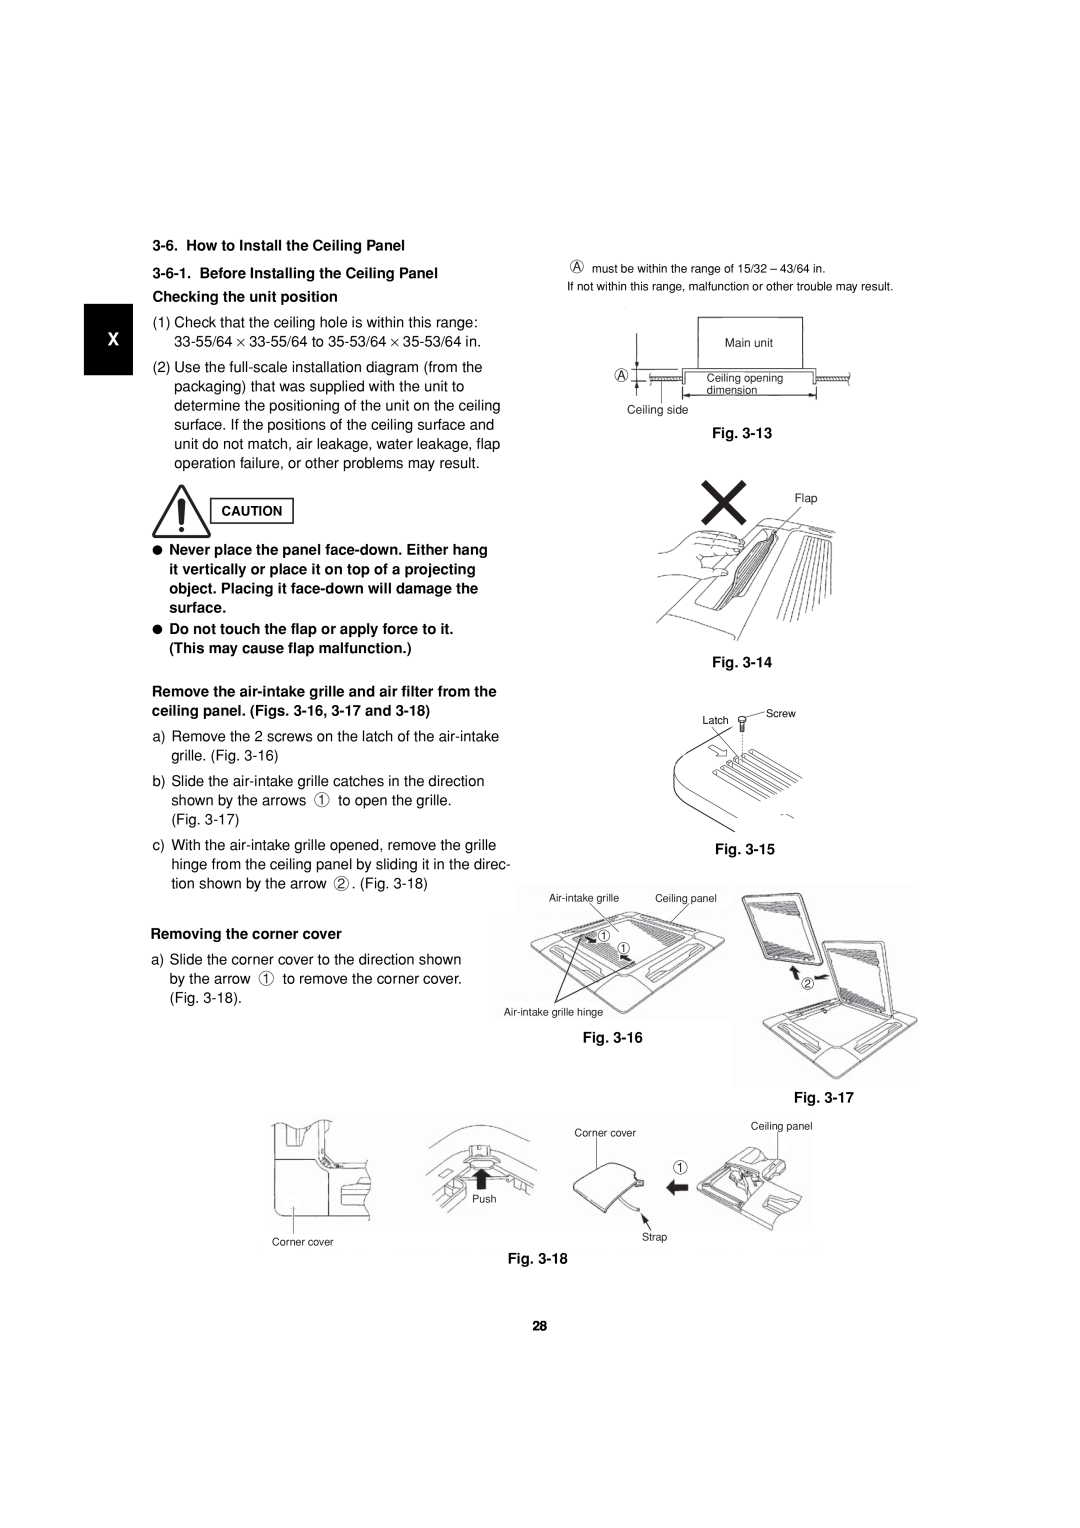 Sanyo 85464359981002 installation instructions How to Install the Ceiling Panel, Removing the corner cover, Fig 